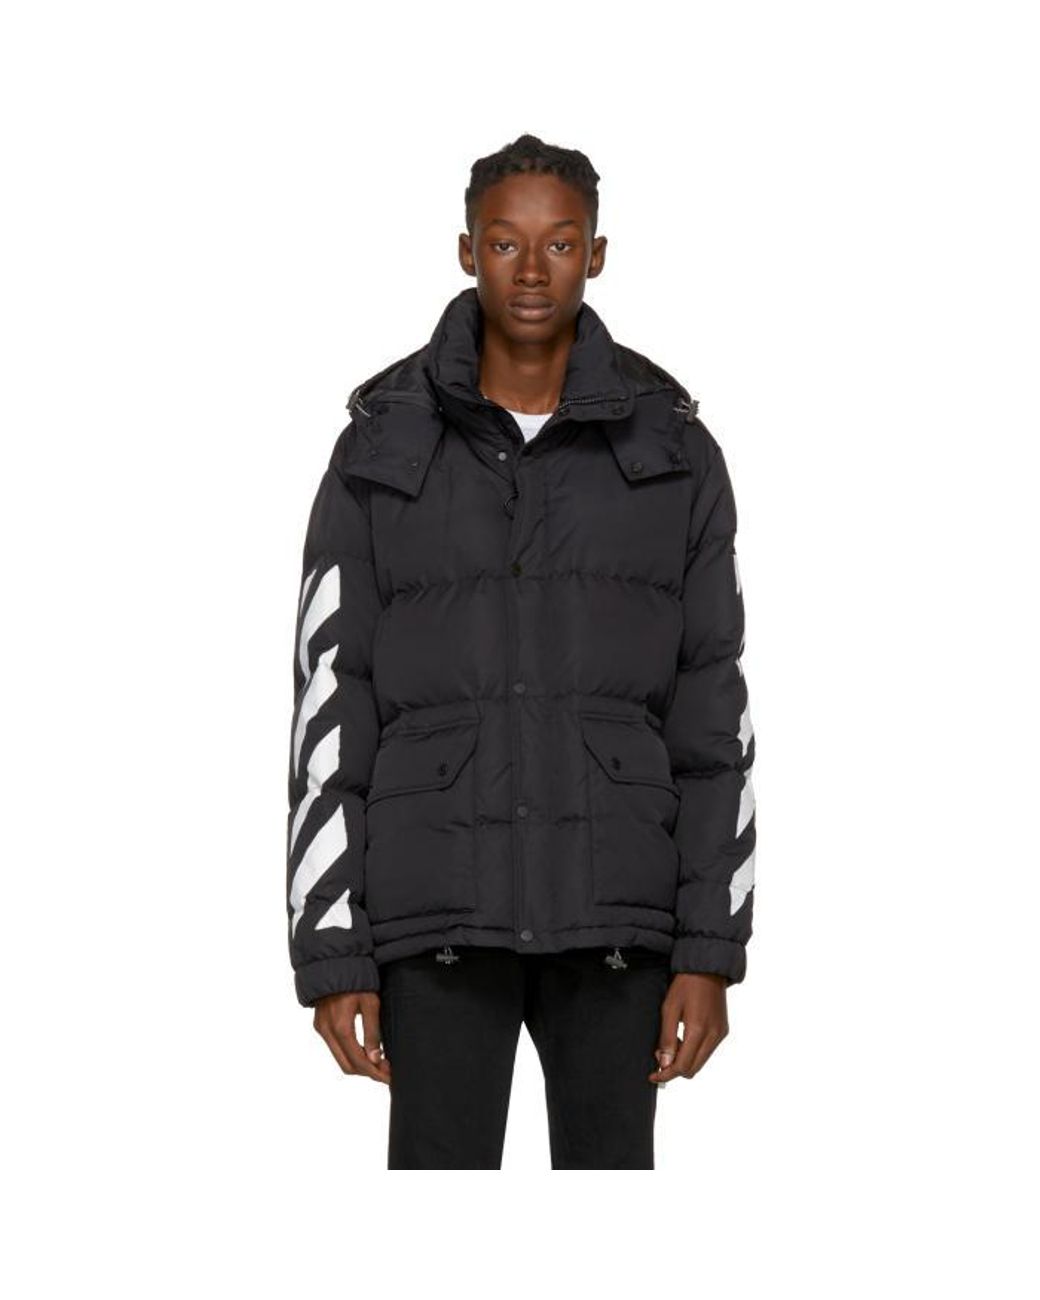 Save 38% Mens Clothing Jackets Casual jackets Off-White c/o Virgil Abloh Synthetic Diagonals Track Jacket in Black for Men 